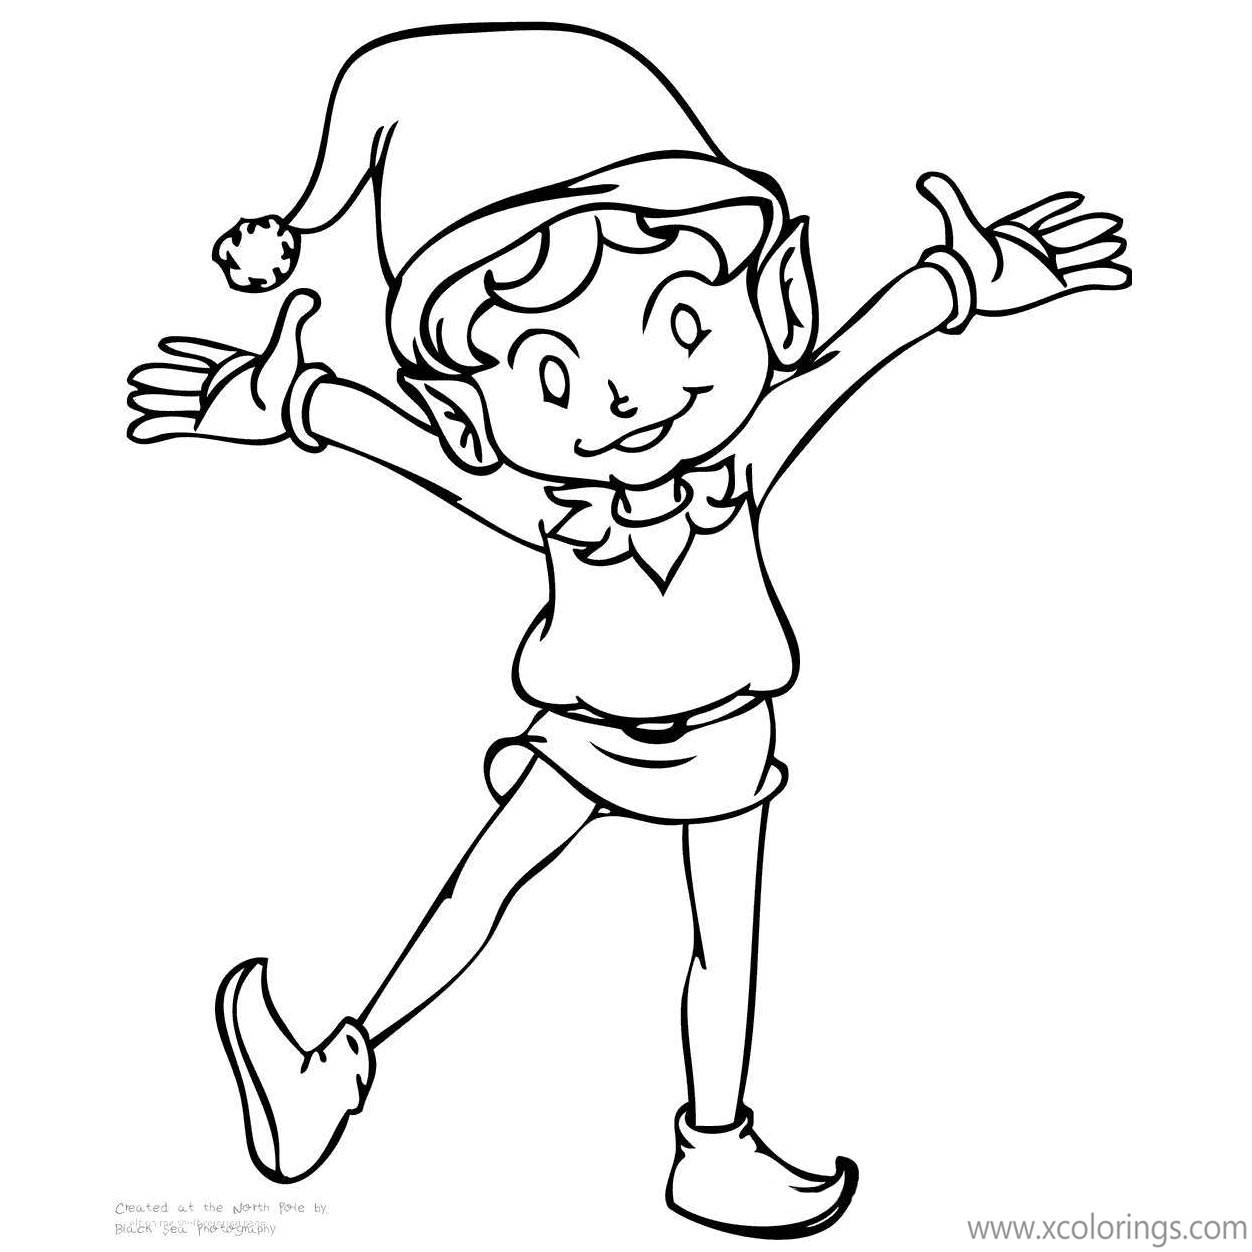 Free Elf On The Shelf Sitting Coloring Pages Elf is Dancing printable